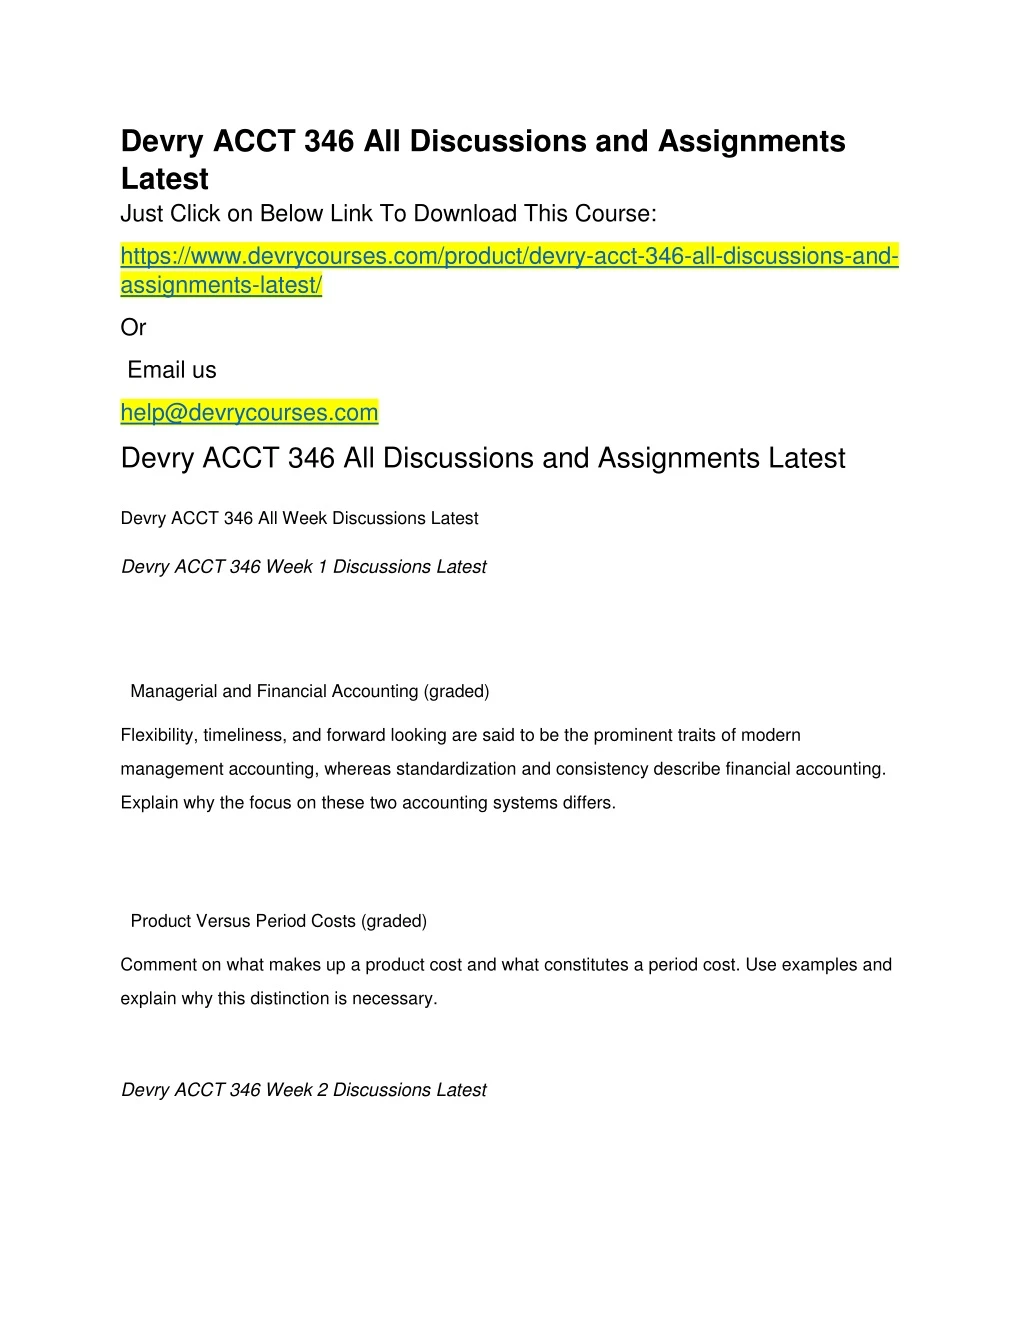 devry acct 346 all discussions and assignments